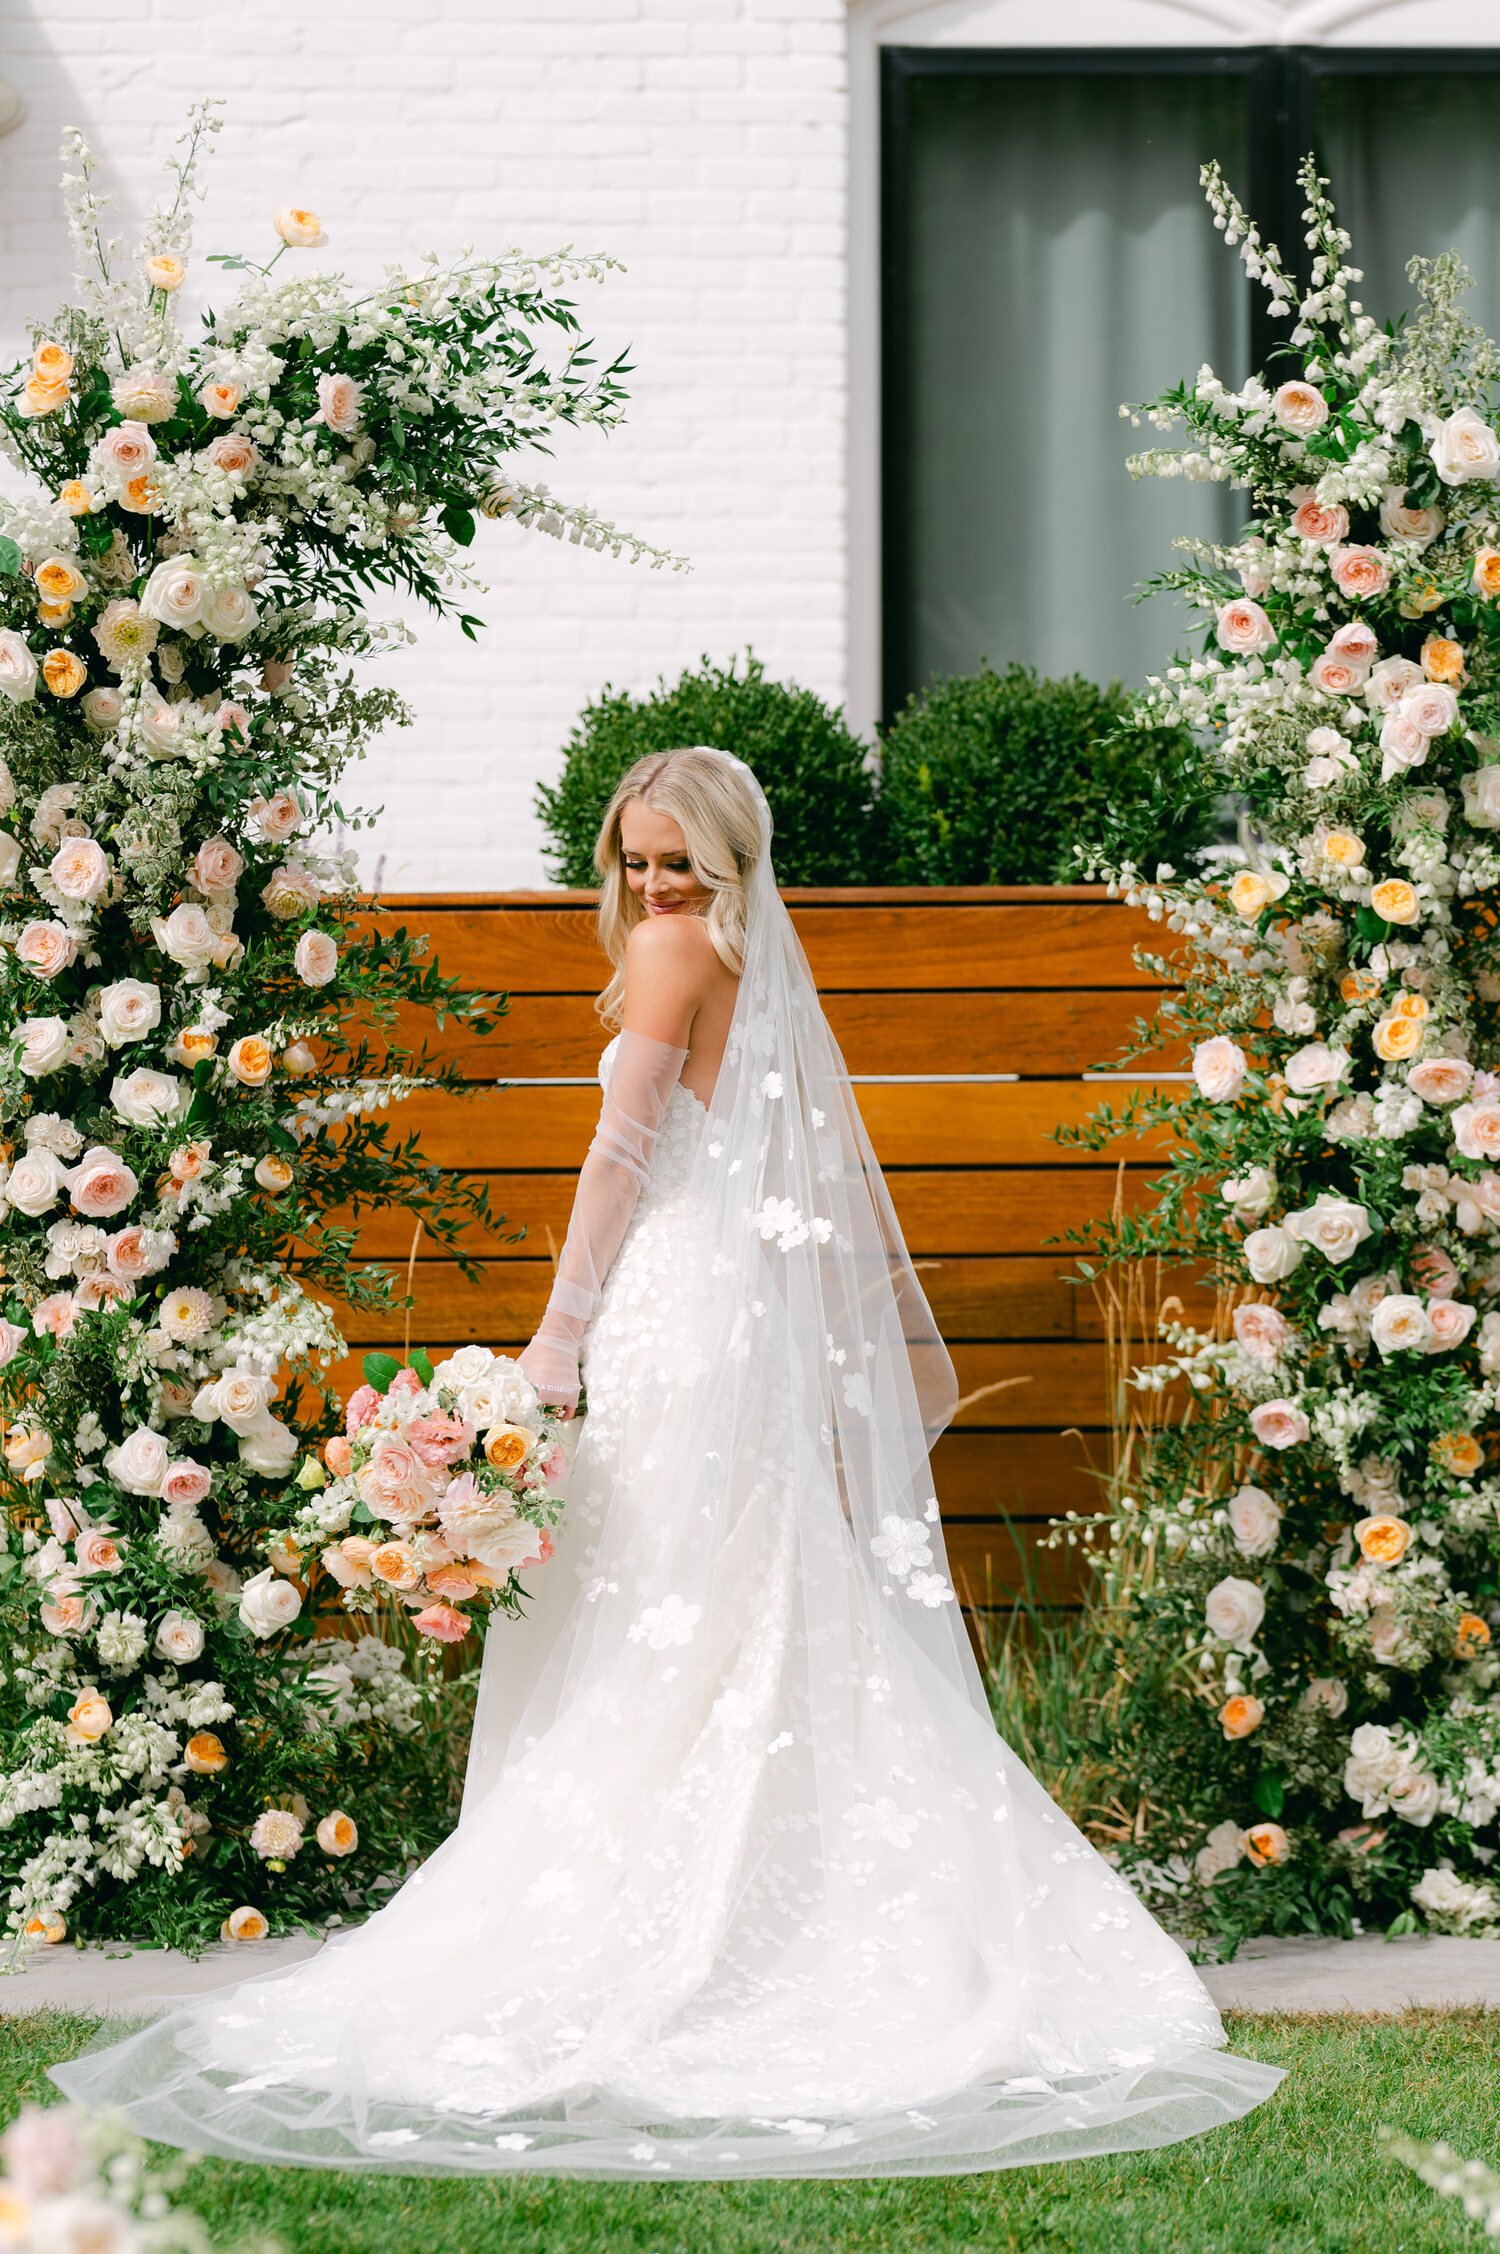 Elm Estate Wedding photos, photo of the bride's long ethereal wedding dress and veil surrounded by soft romantic florals